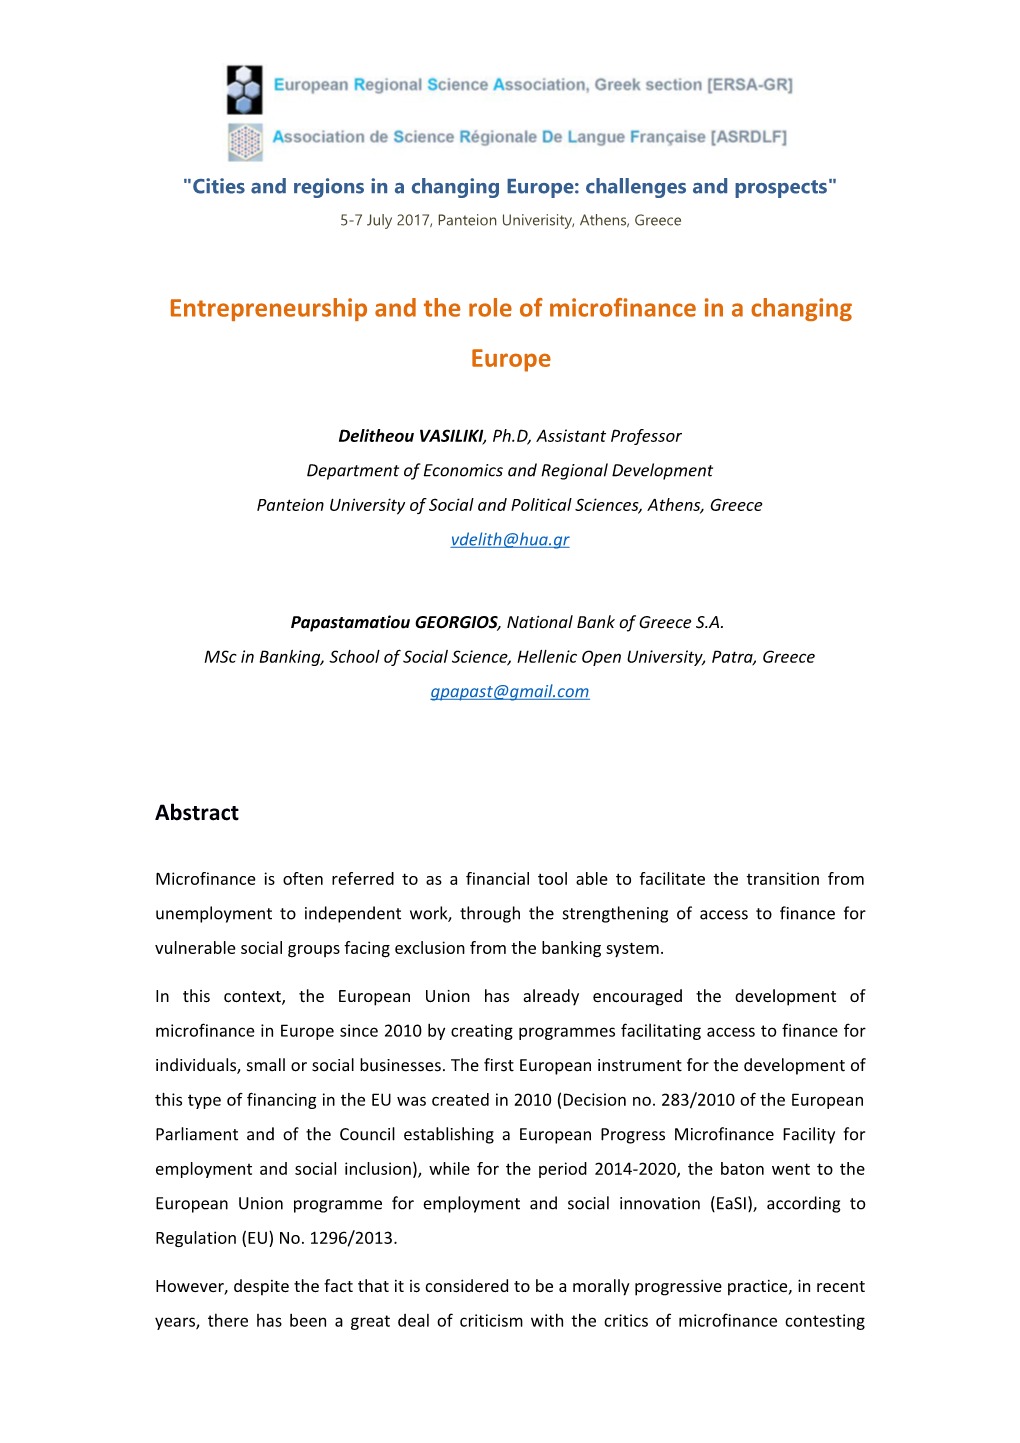 Entrepreneurship and the Role of Microfinance in a Changing Europe